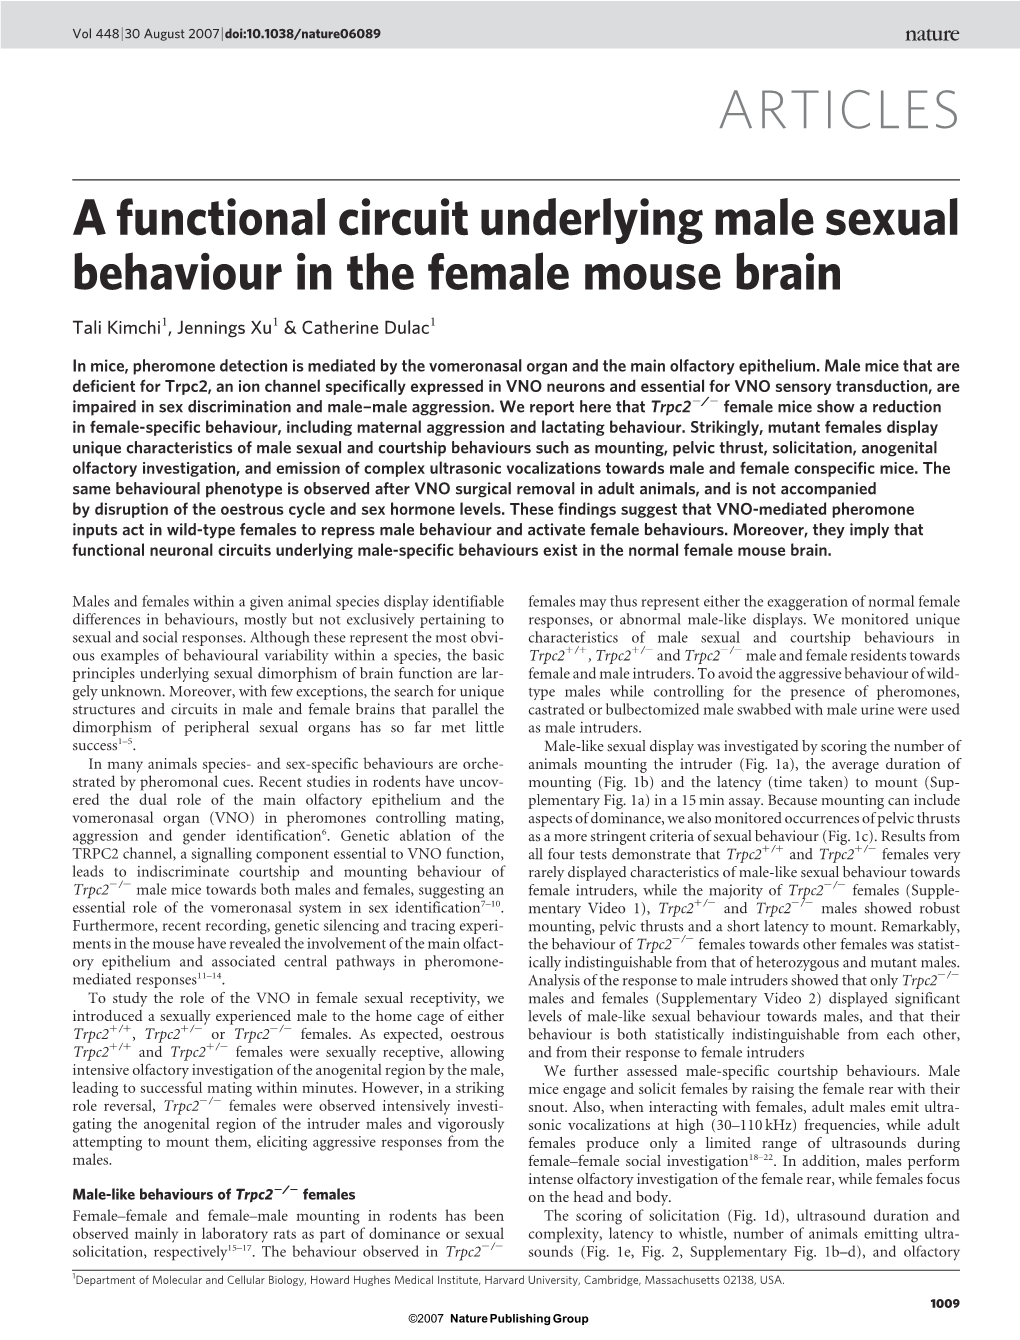 A Functional Circuit Underlying Male Sexual Behaviour in the Female Mouse Brain